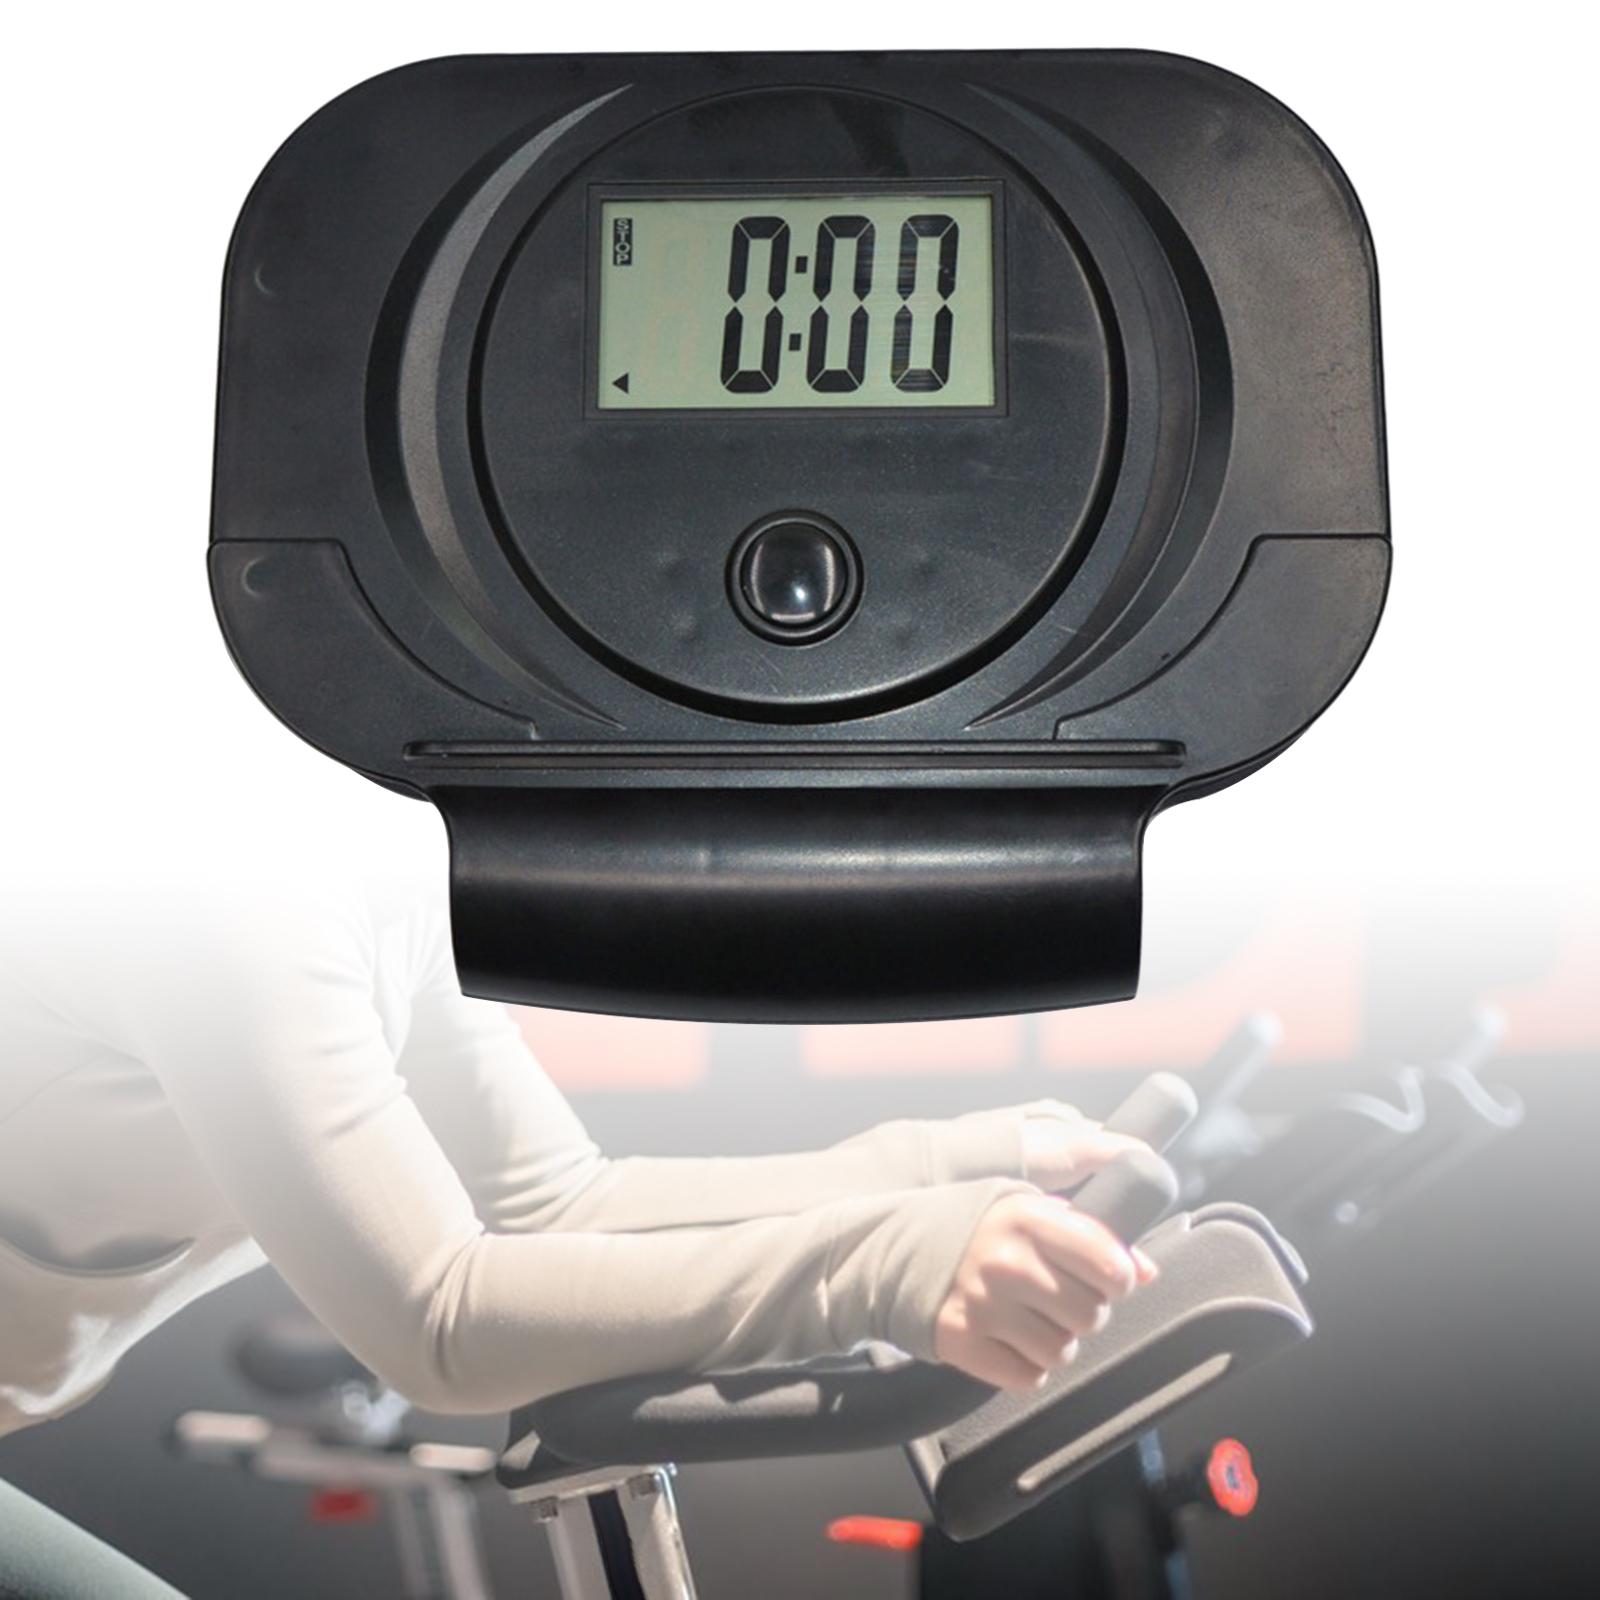 Monitor Speedometer Accs Cycle Electronic for Exercise Bike Sport Bikes